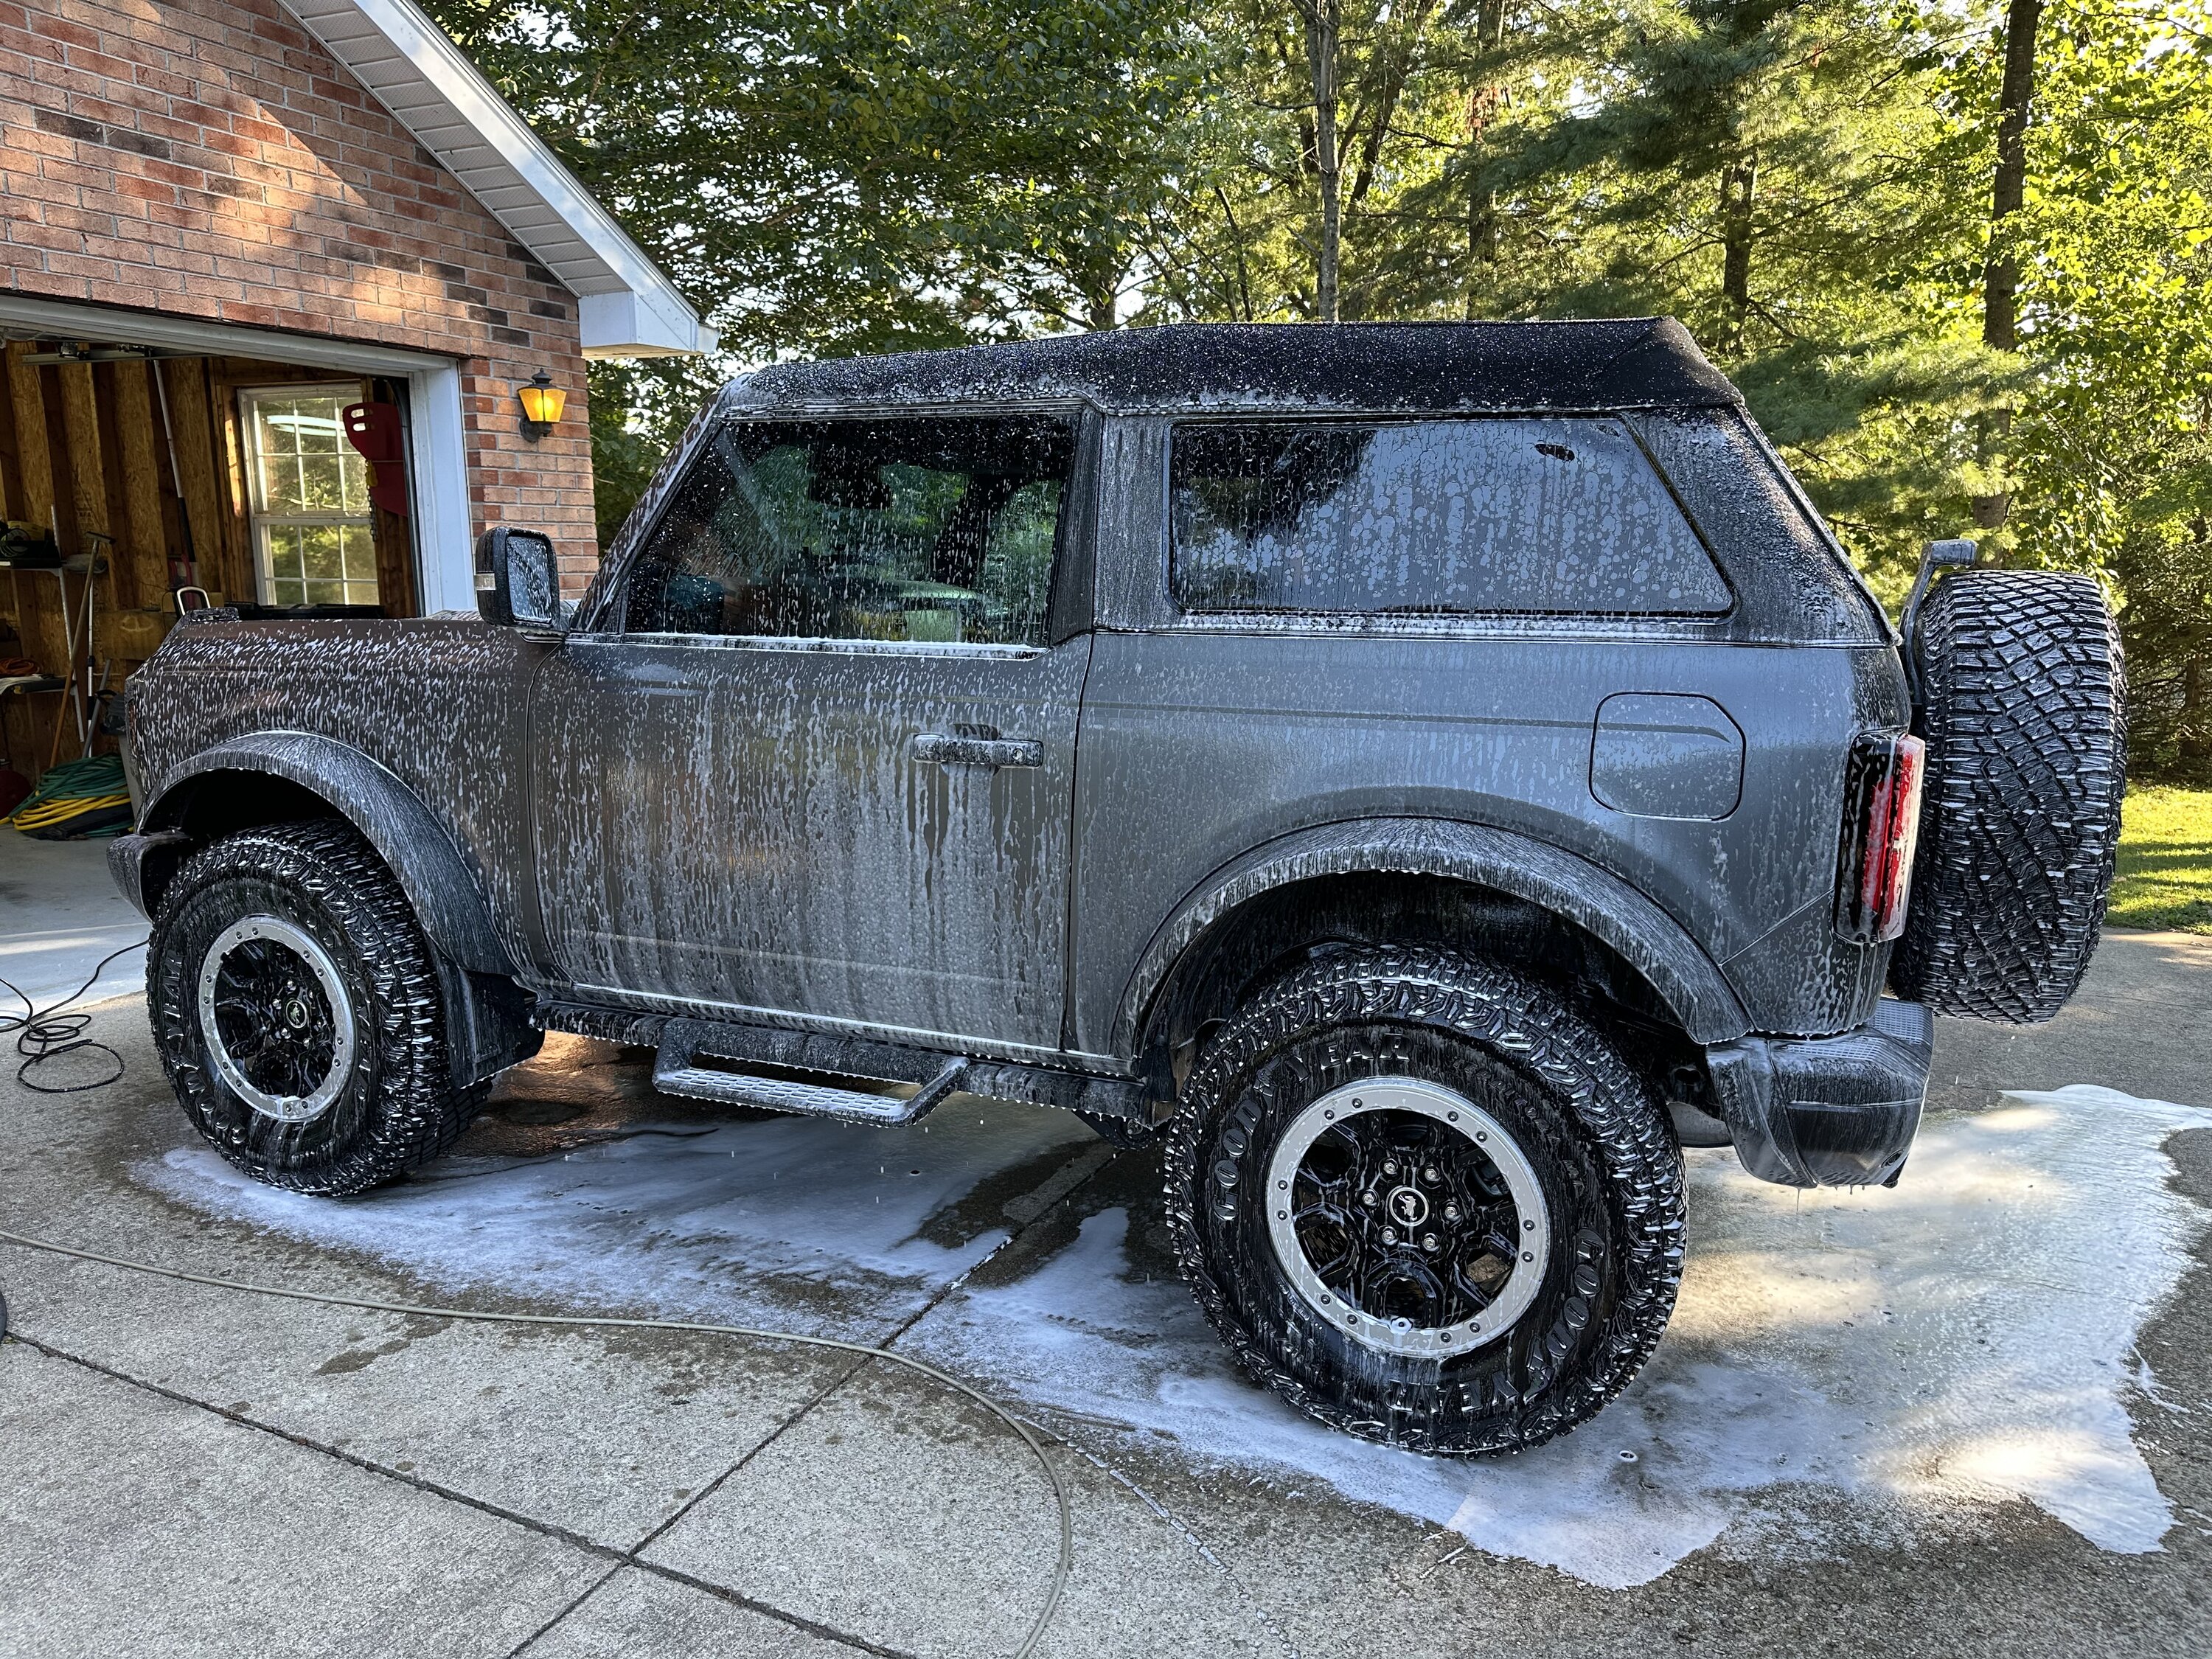 Ford Bronco Let's see your favorite Bronco photos! Bath Time